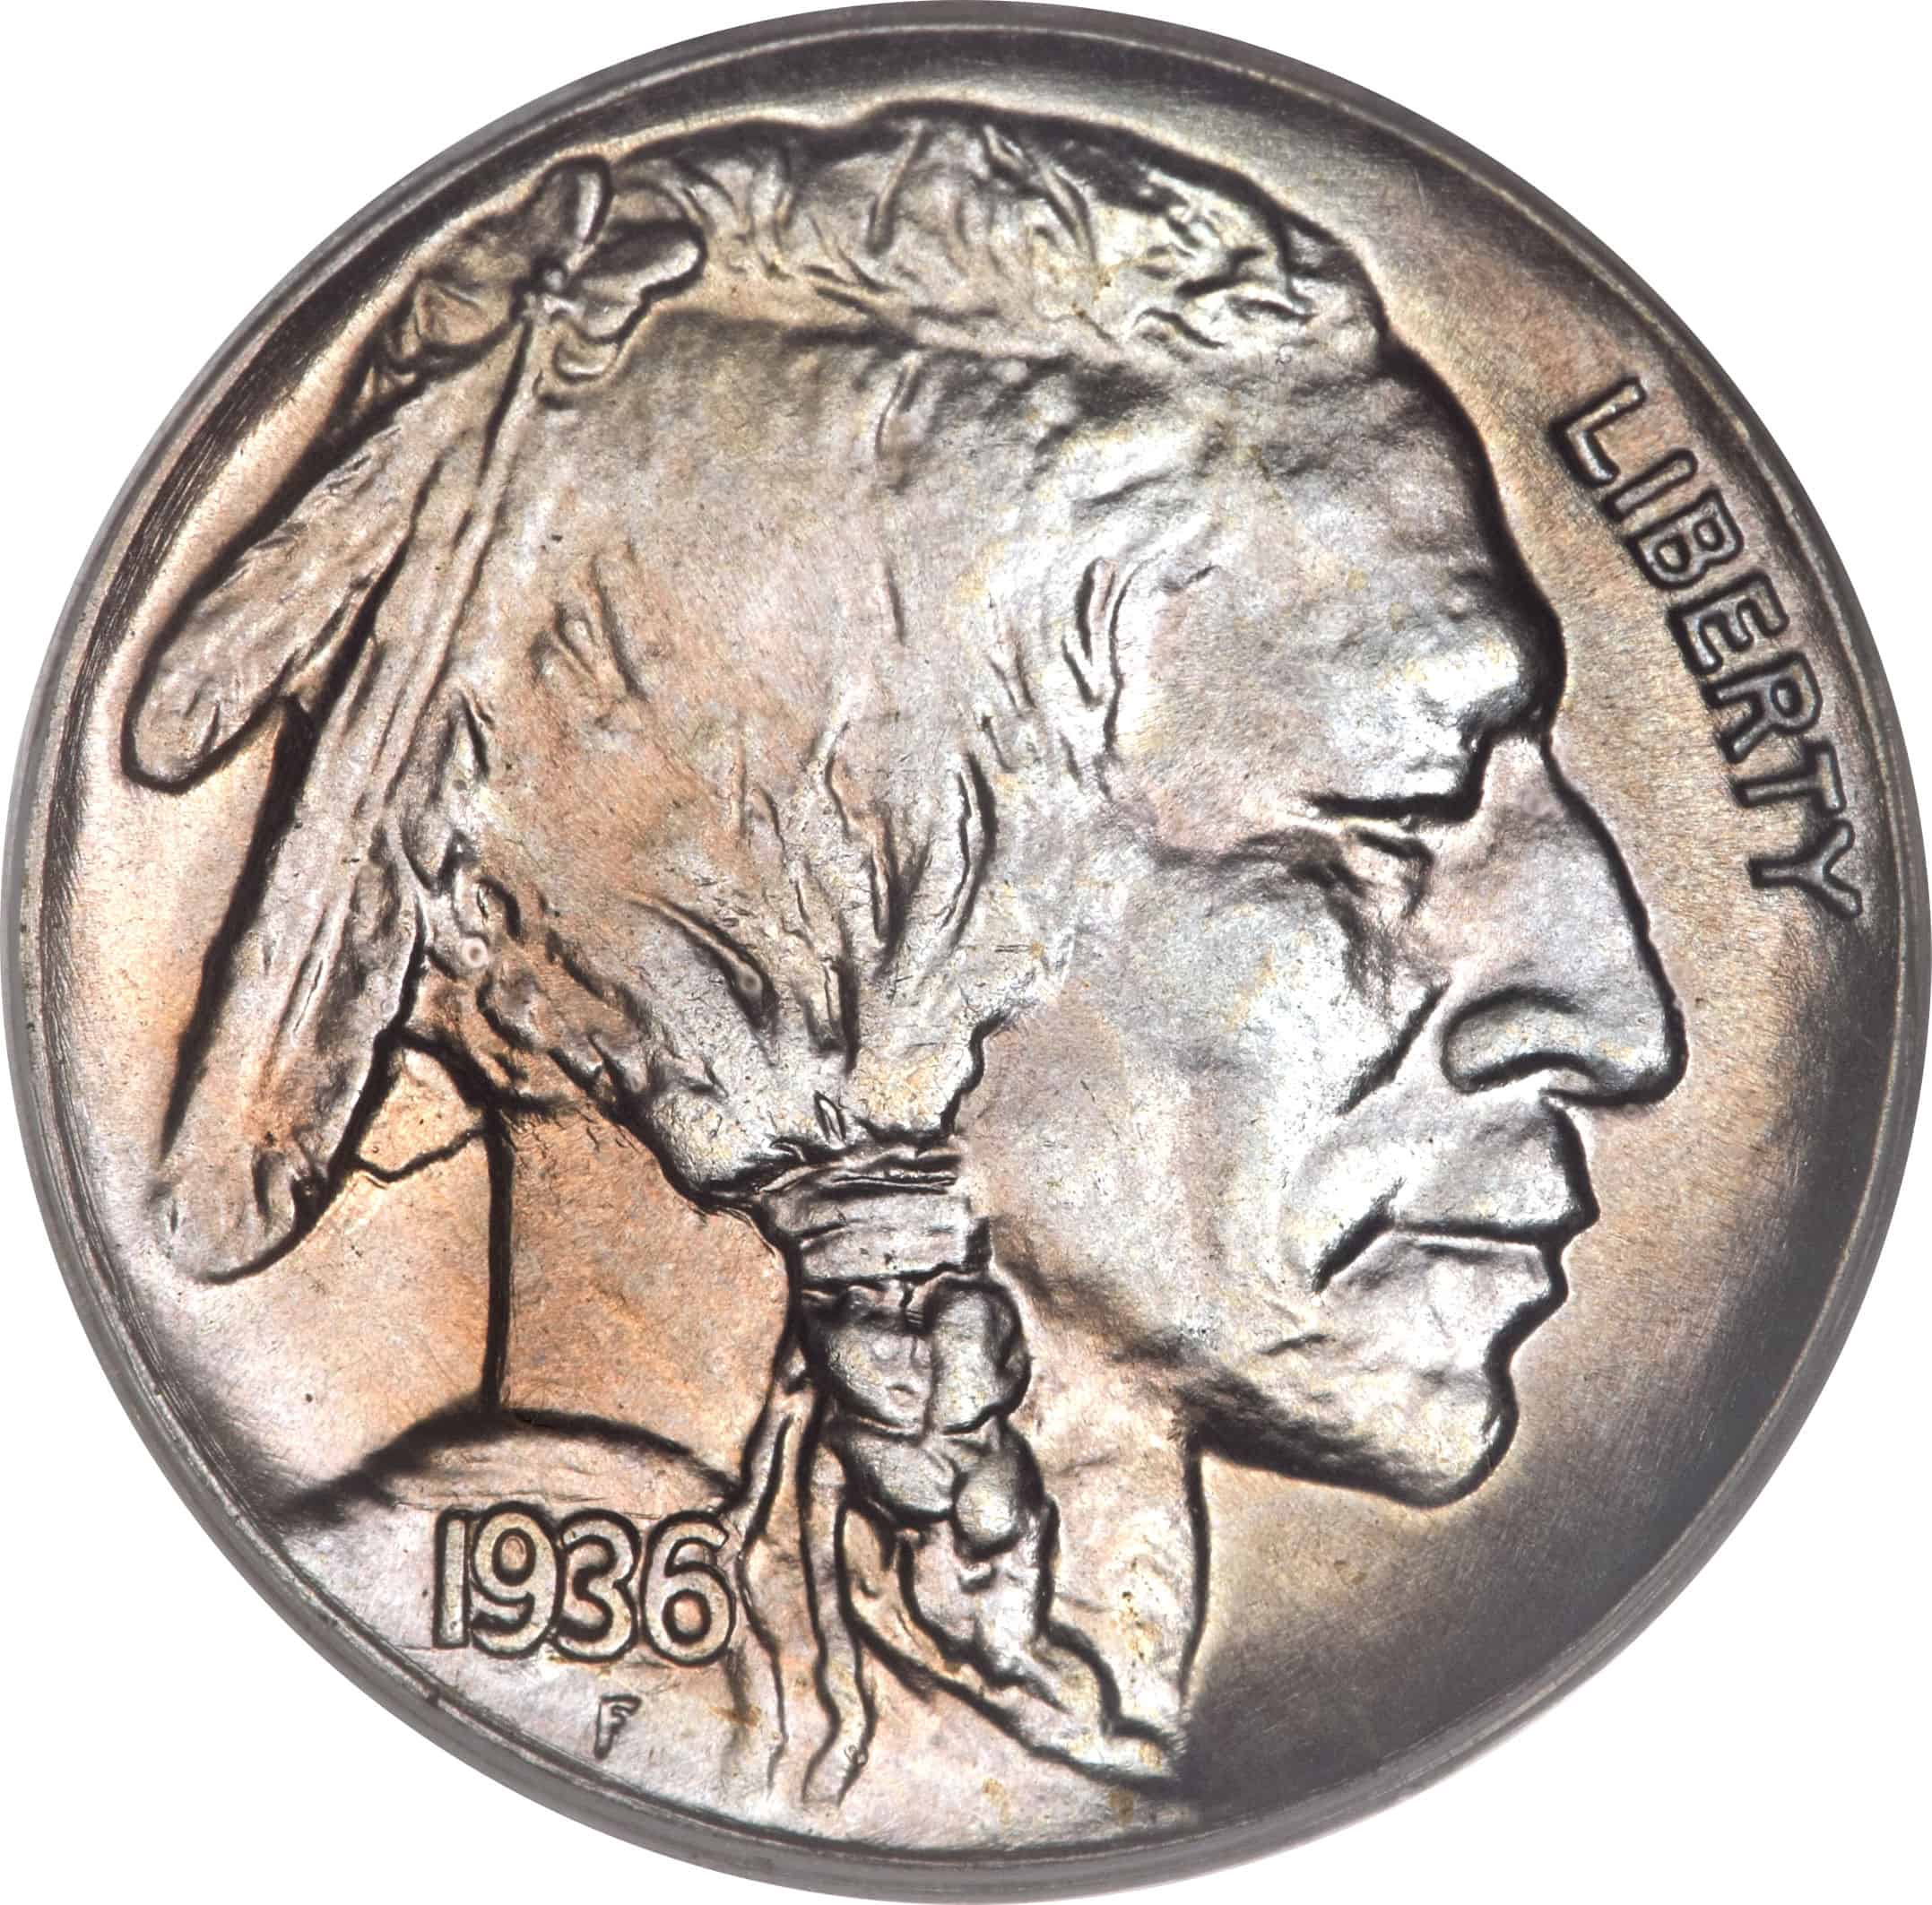 The Obverse of the 1936 Buffalo Nickel